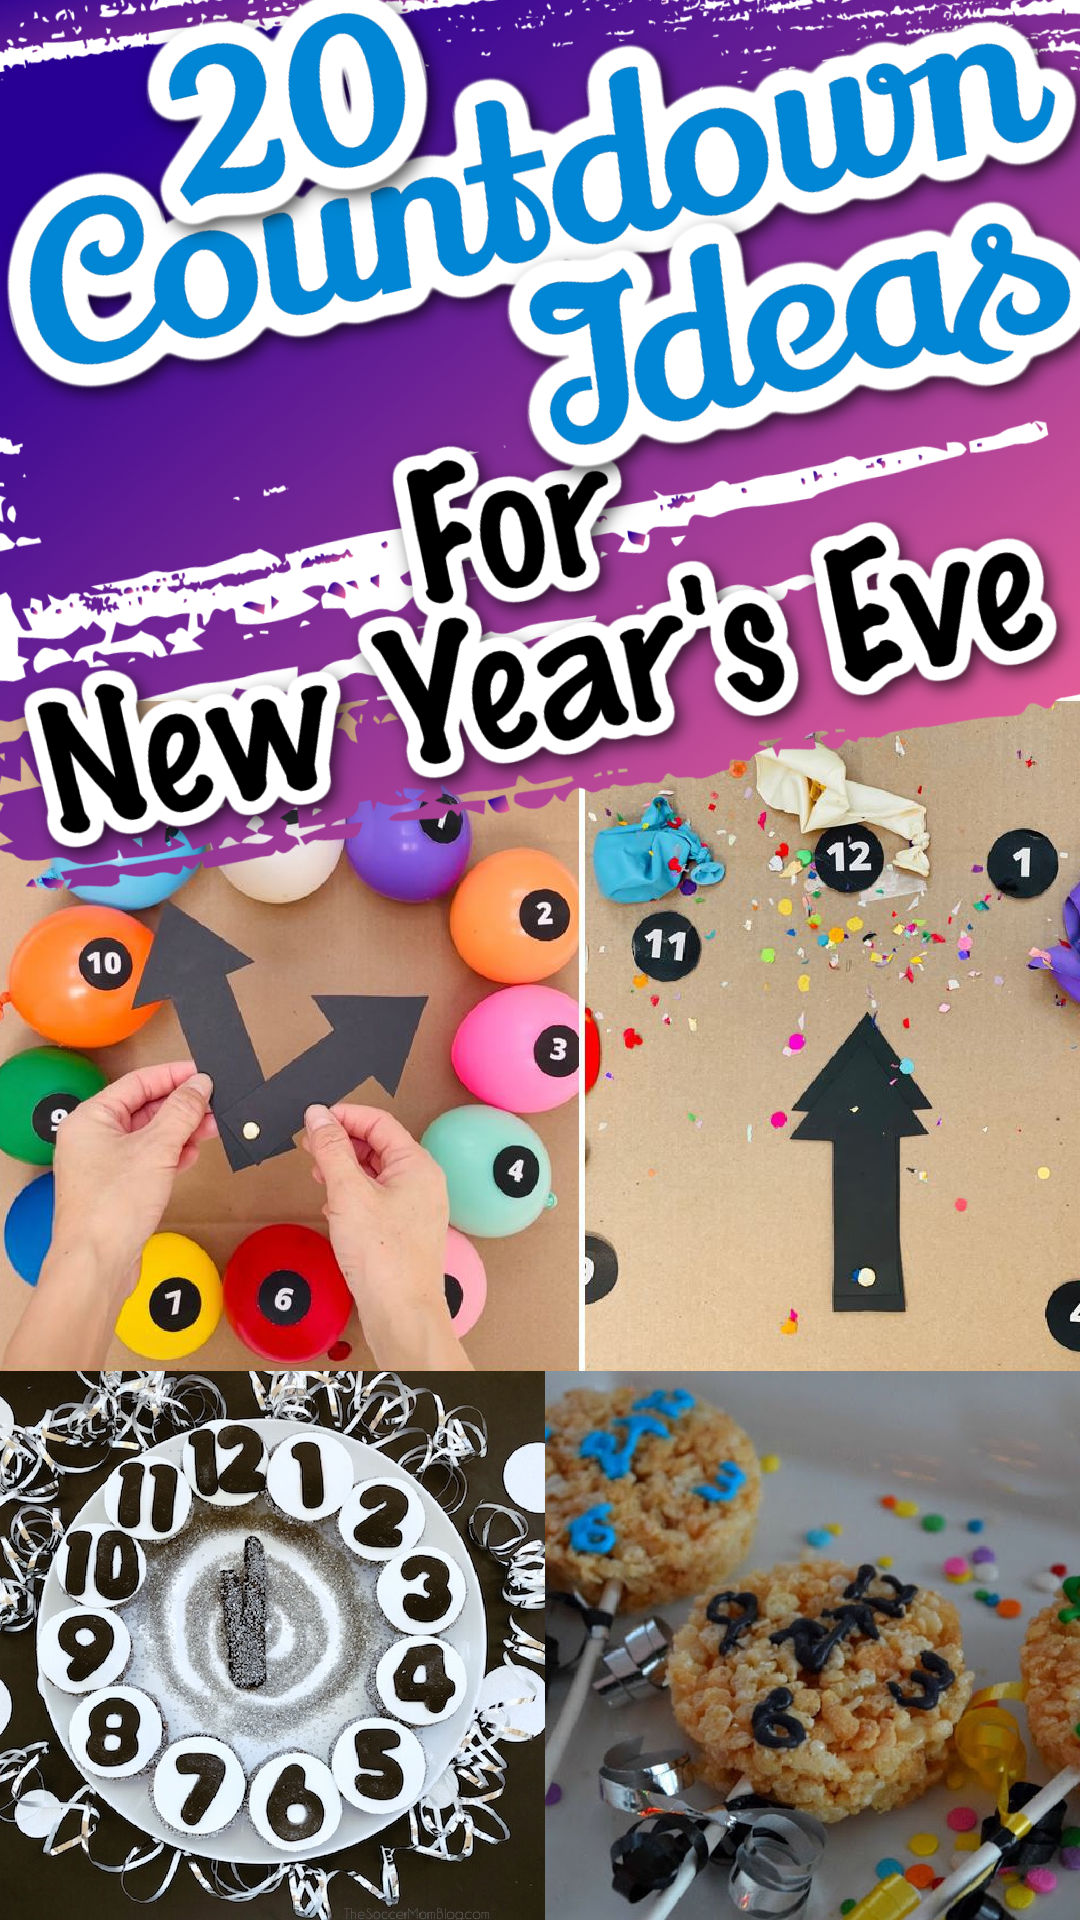 A collage of New Year's Eve clock countdown ideas.